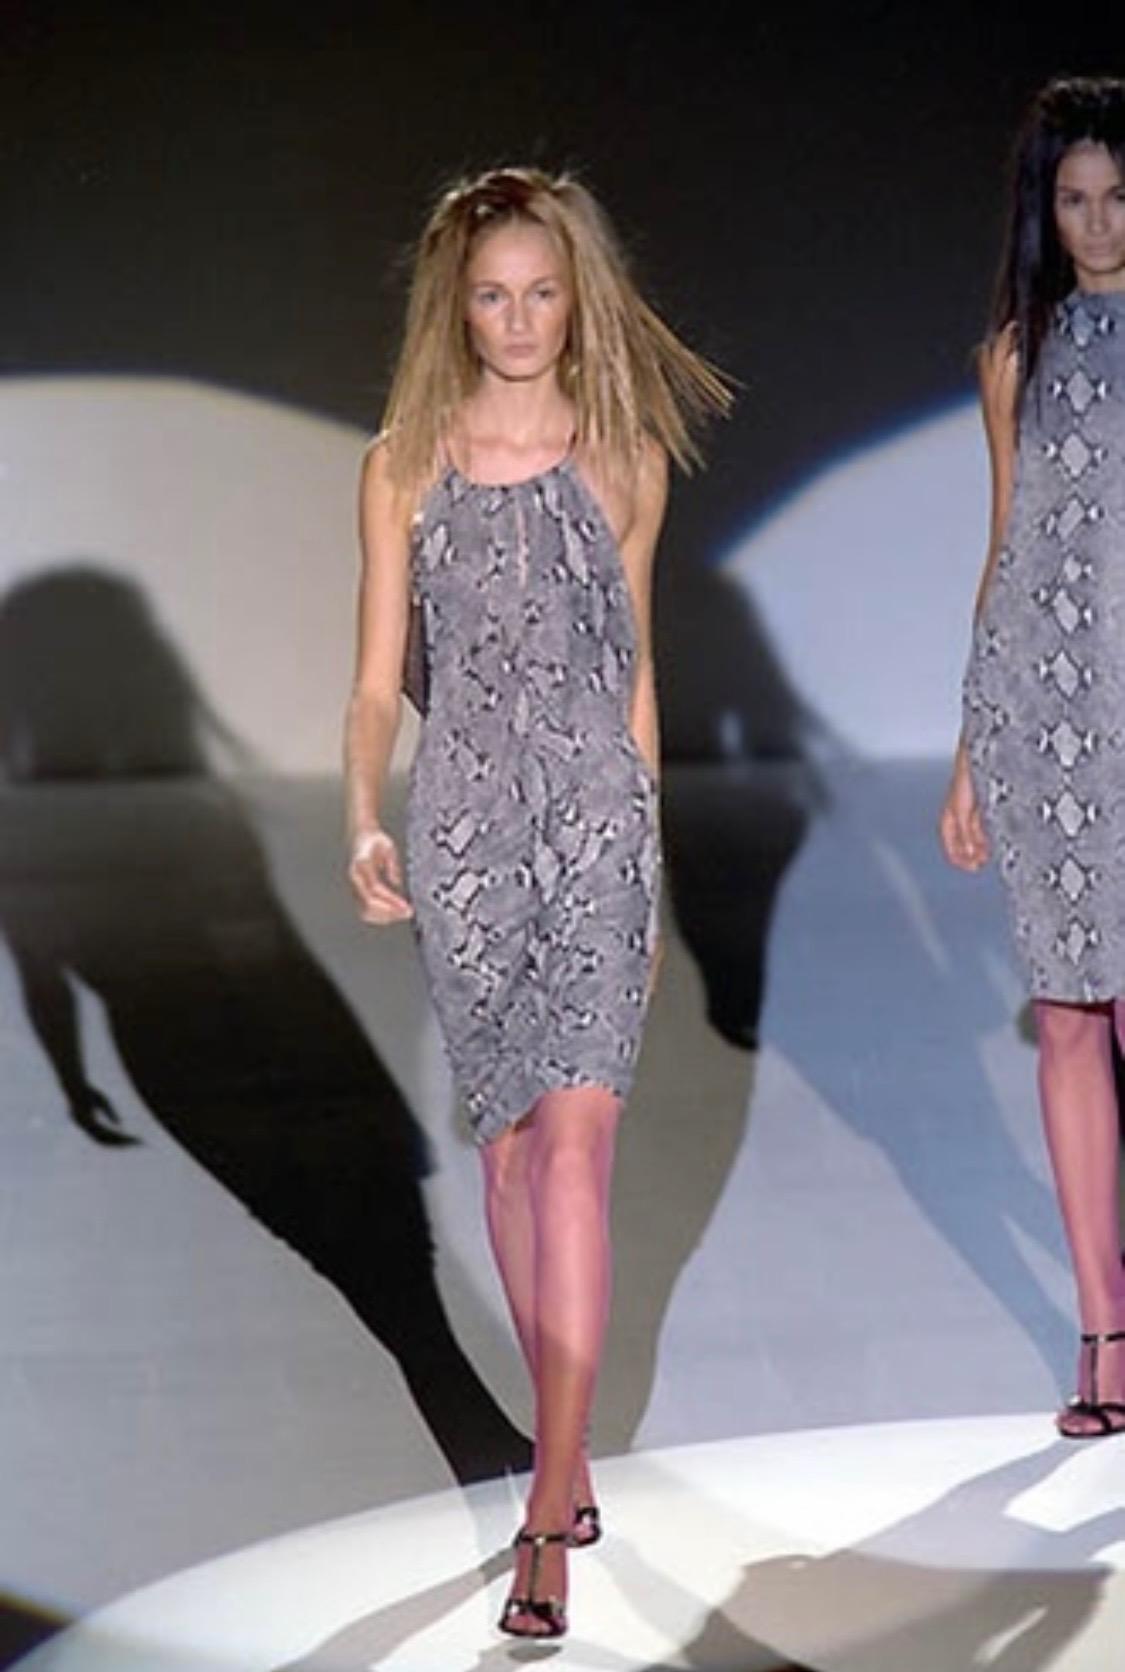 Presenting a plunging neckline snake print viscose dress designed by Tom Ford for Gucci. This piece debuted in grey as look number 2 on Danita Angell for the Spring/Summer 2000 runway collection, which Ford described as 